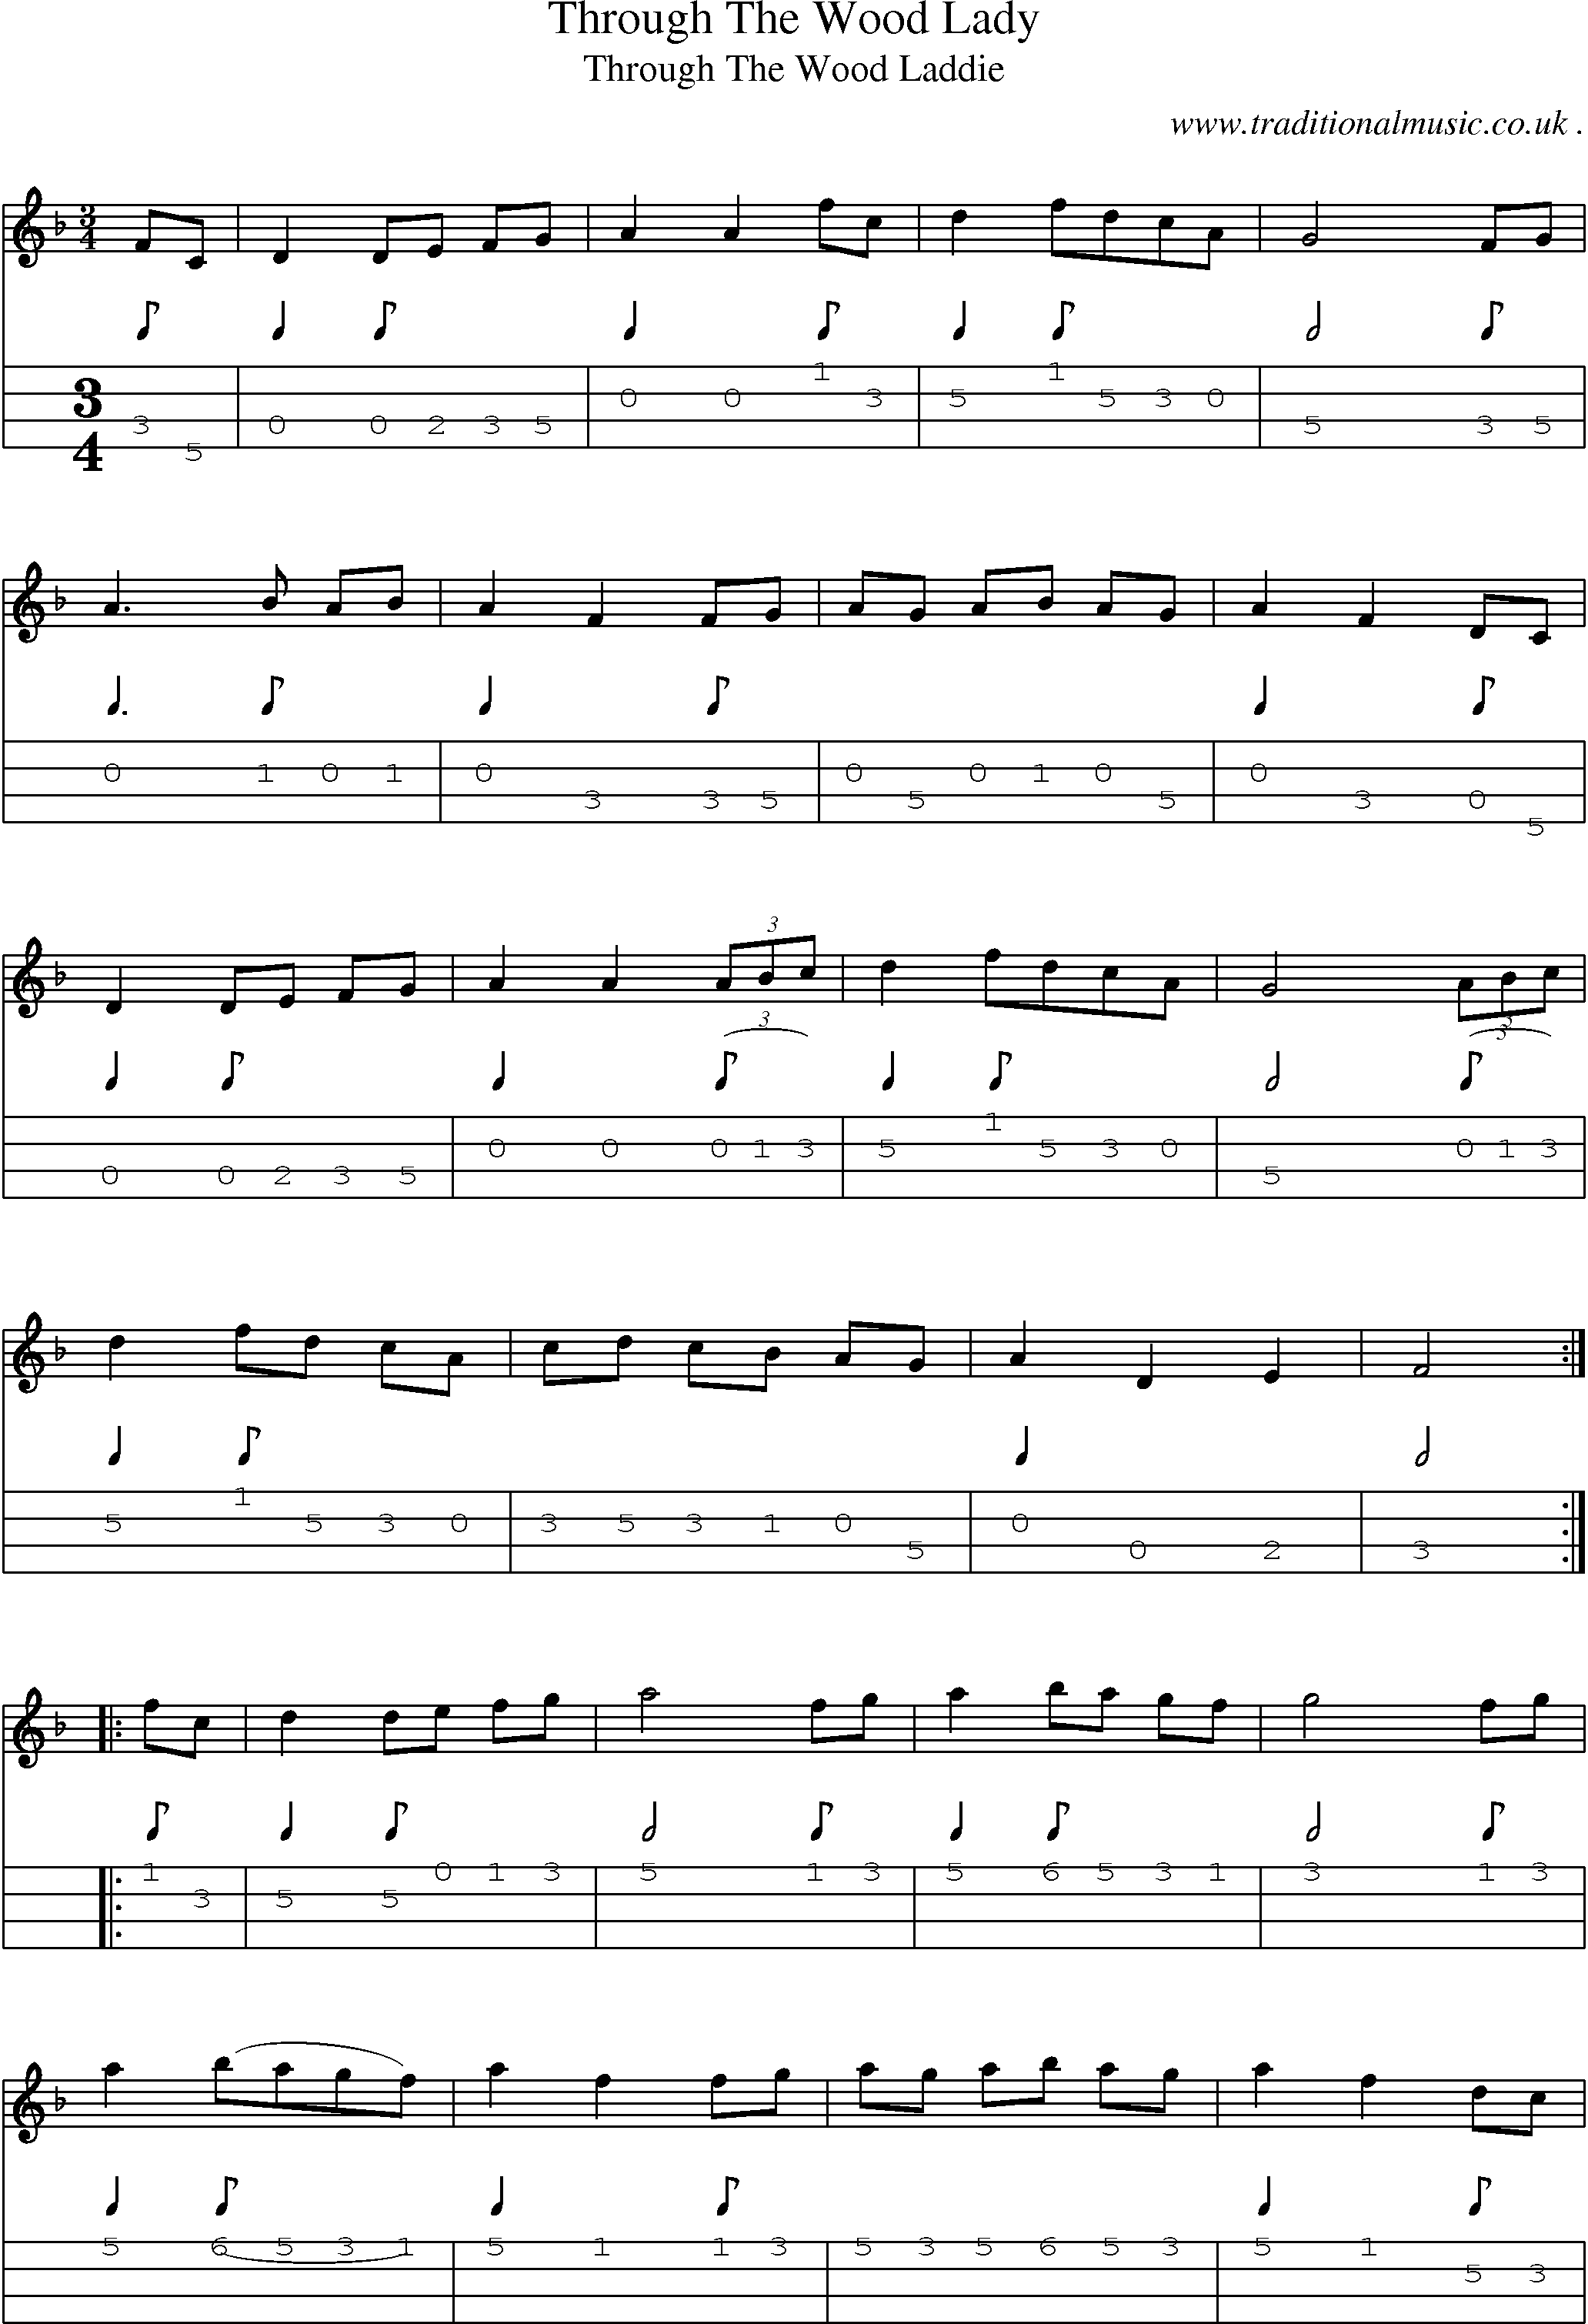 Sheet-Music and Mandolin Tabs for Through The Wood Lady